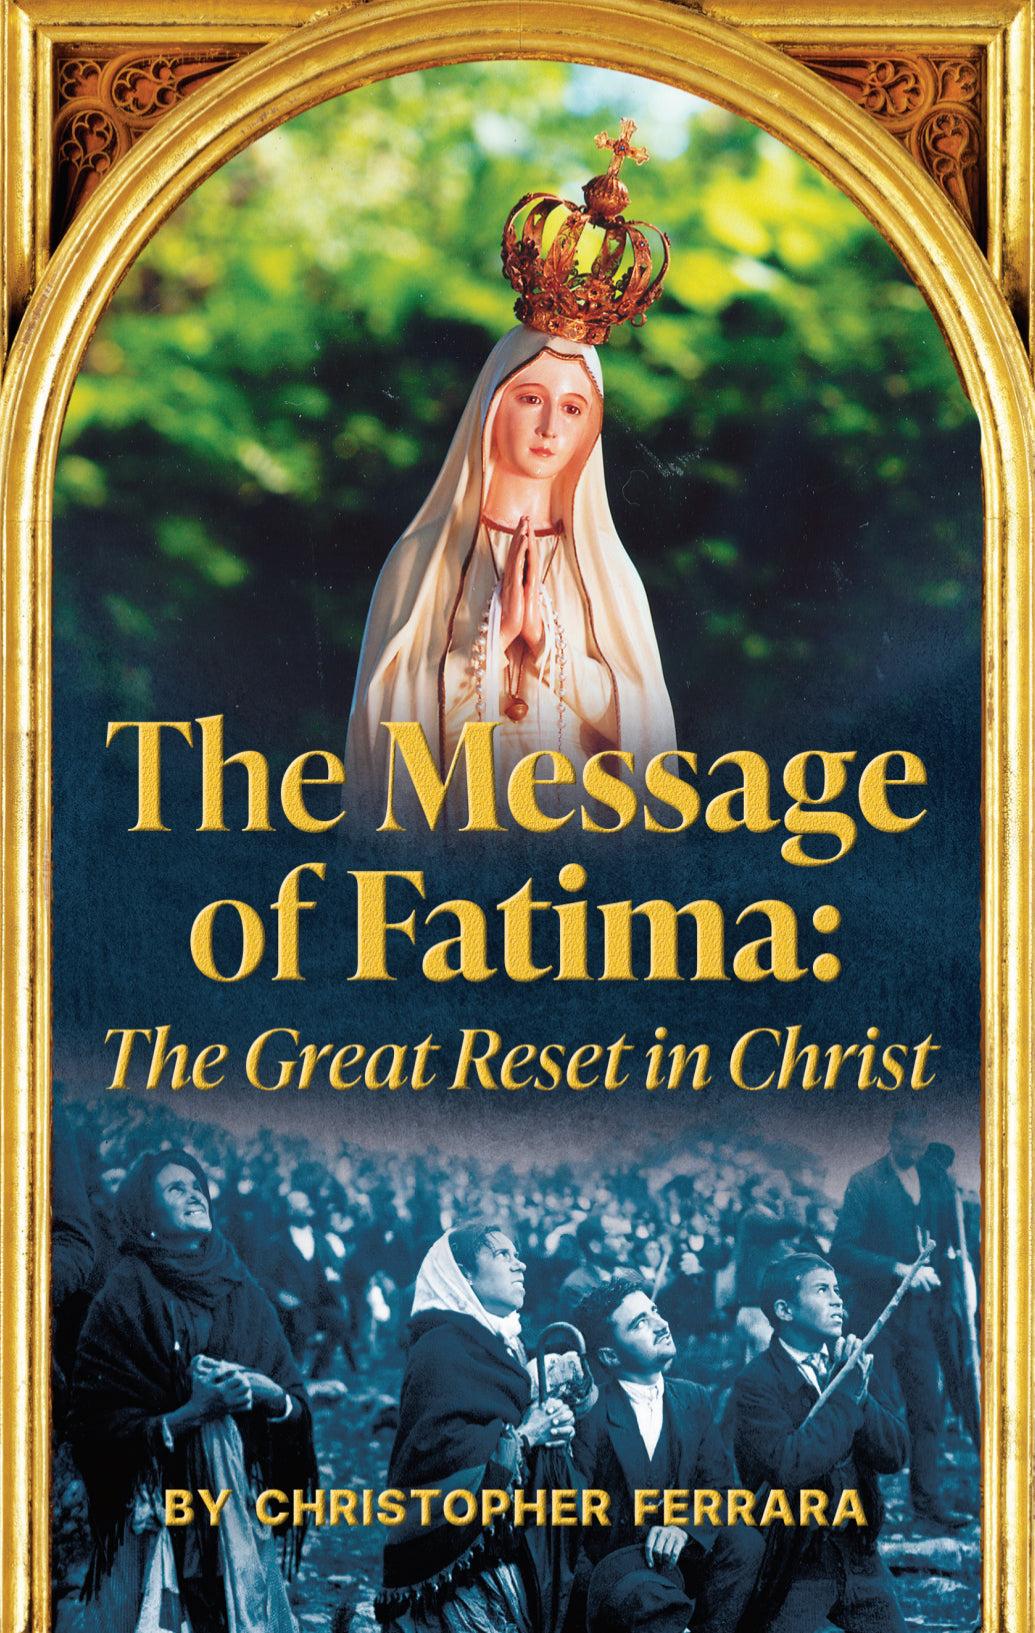 The Message of Fatima: The Great Reset in Christ